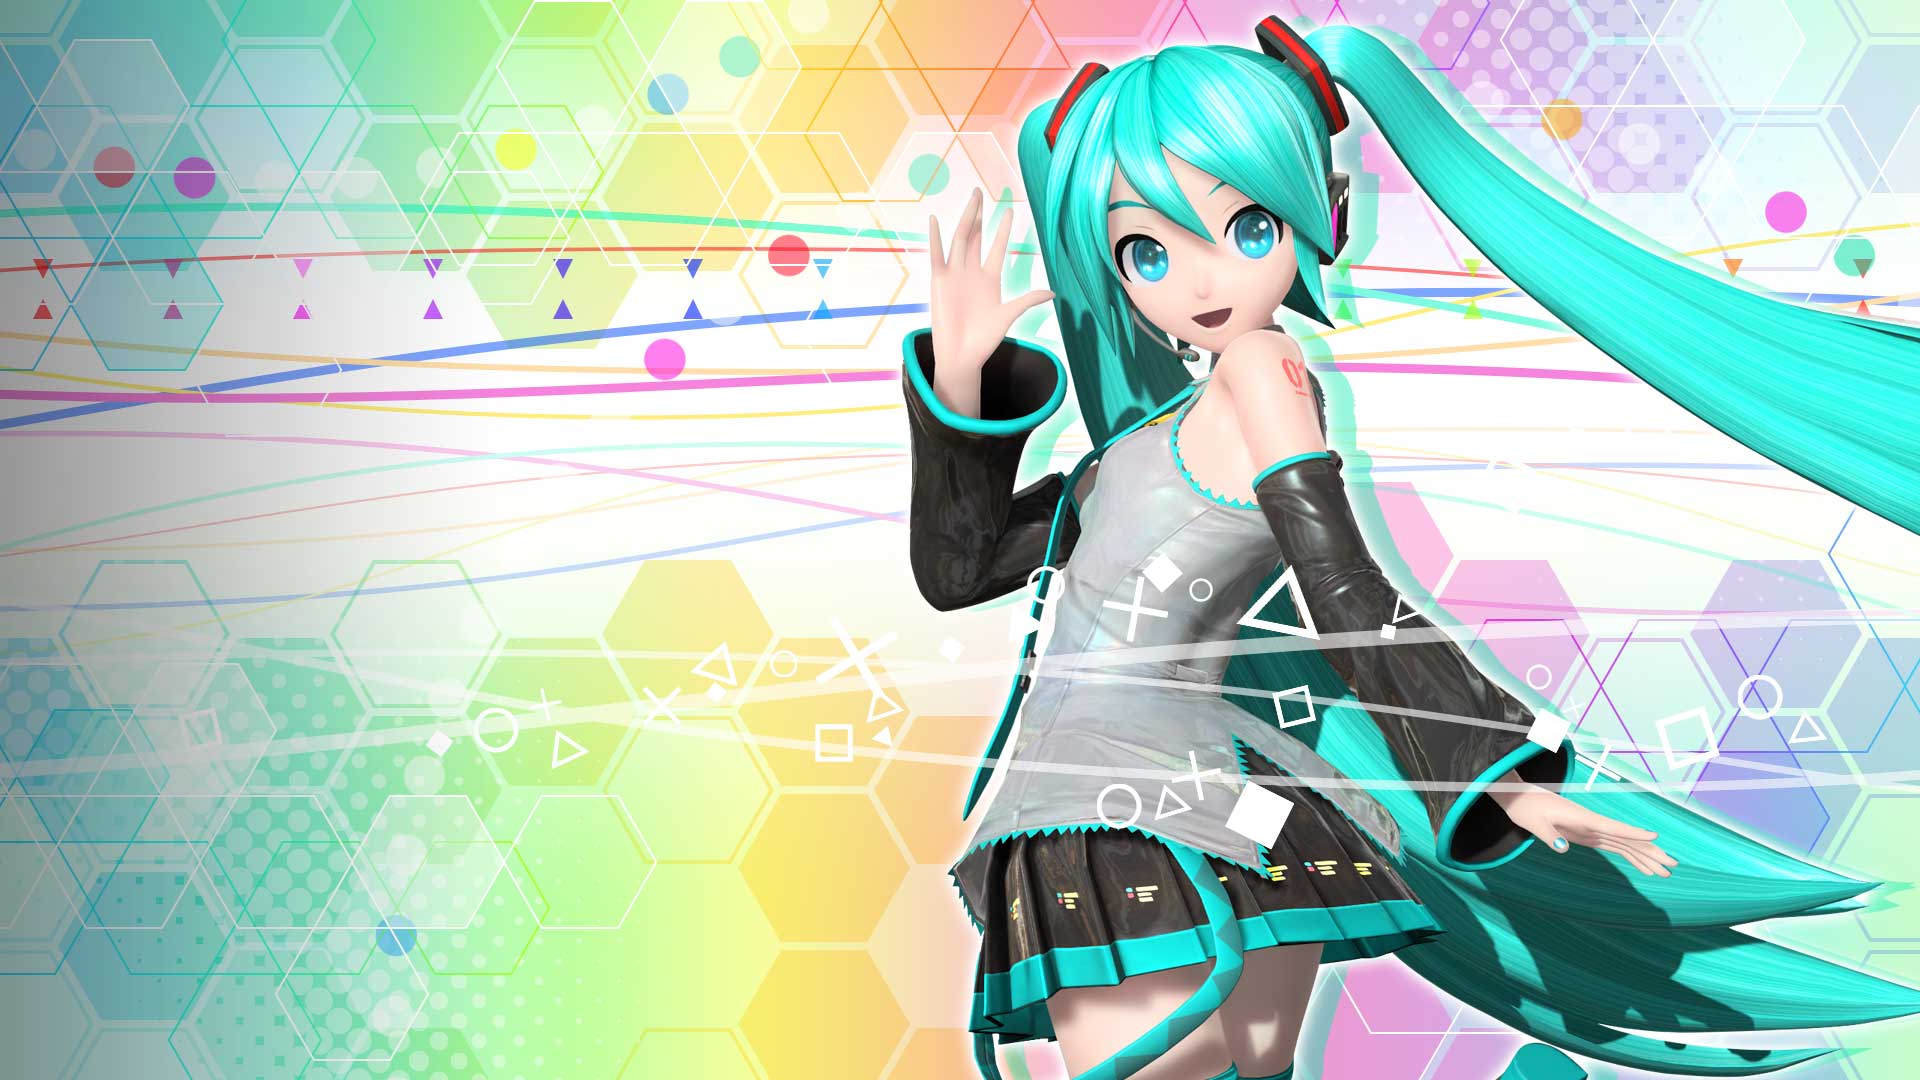 All About Vocaloid, Hatsune Miku & The Producers Behind The Scenes ⋆ Chromatic Dreamers